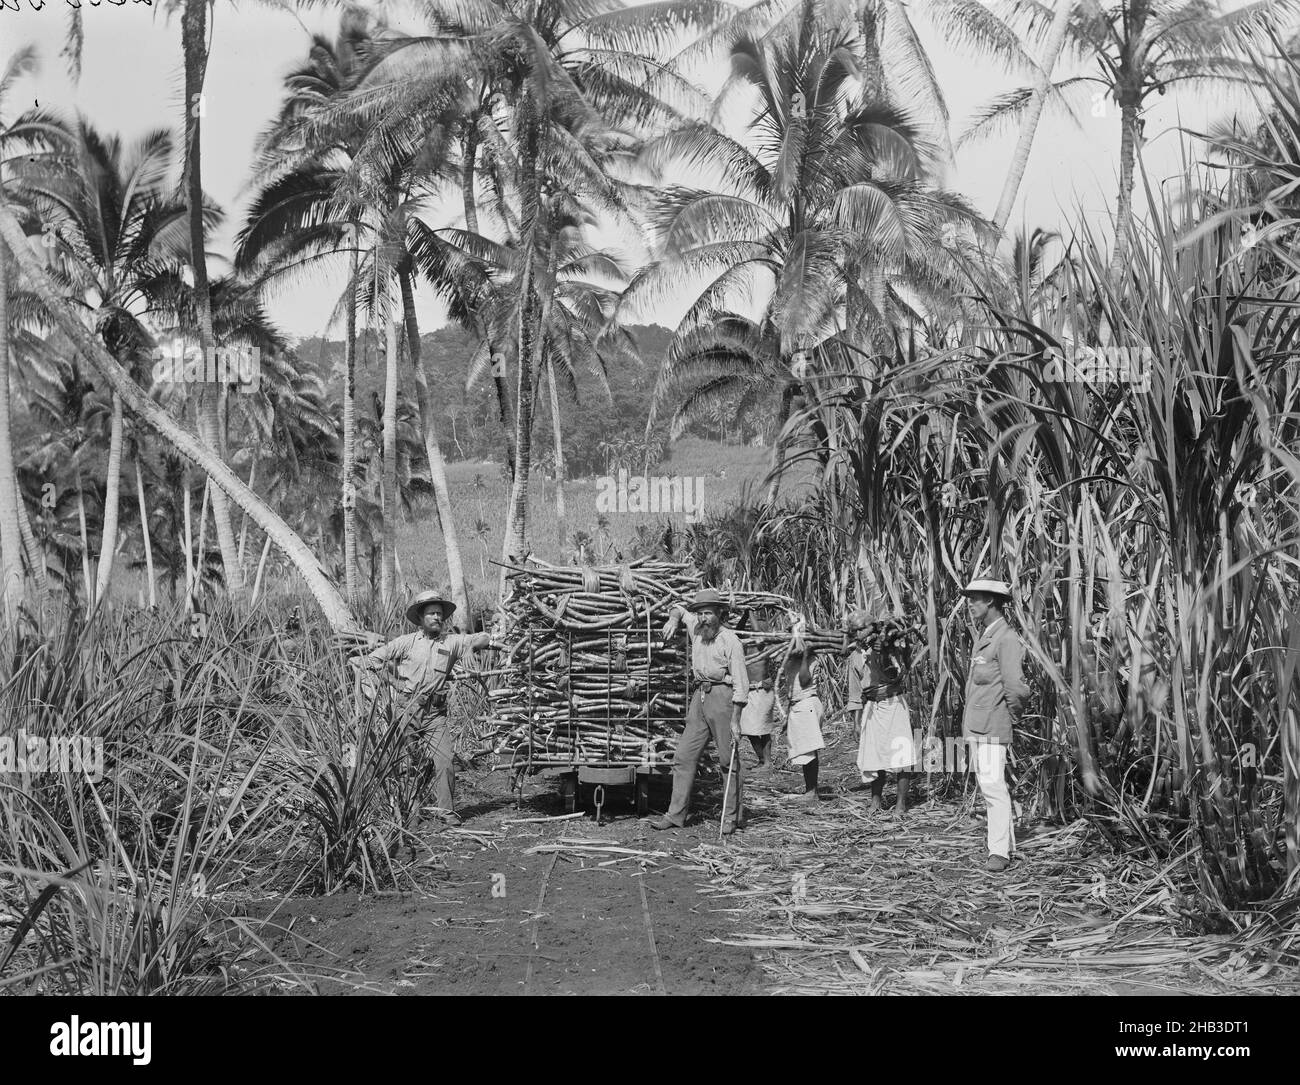 [Fijian Sugar Field, Mango [Mago], Loading The Cane], Burton Brothers studio, photography studio, 1884, Dunedin, gelatin dry plate process, Sugar field to right, railway line runs down centre from top to bottom. Three European men stand in front of rolling stock with pile of sugar cane on top. Three other people are carrying cane to rolling stock. Tall coconut trees in near background with high mountain behind Stock Photo